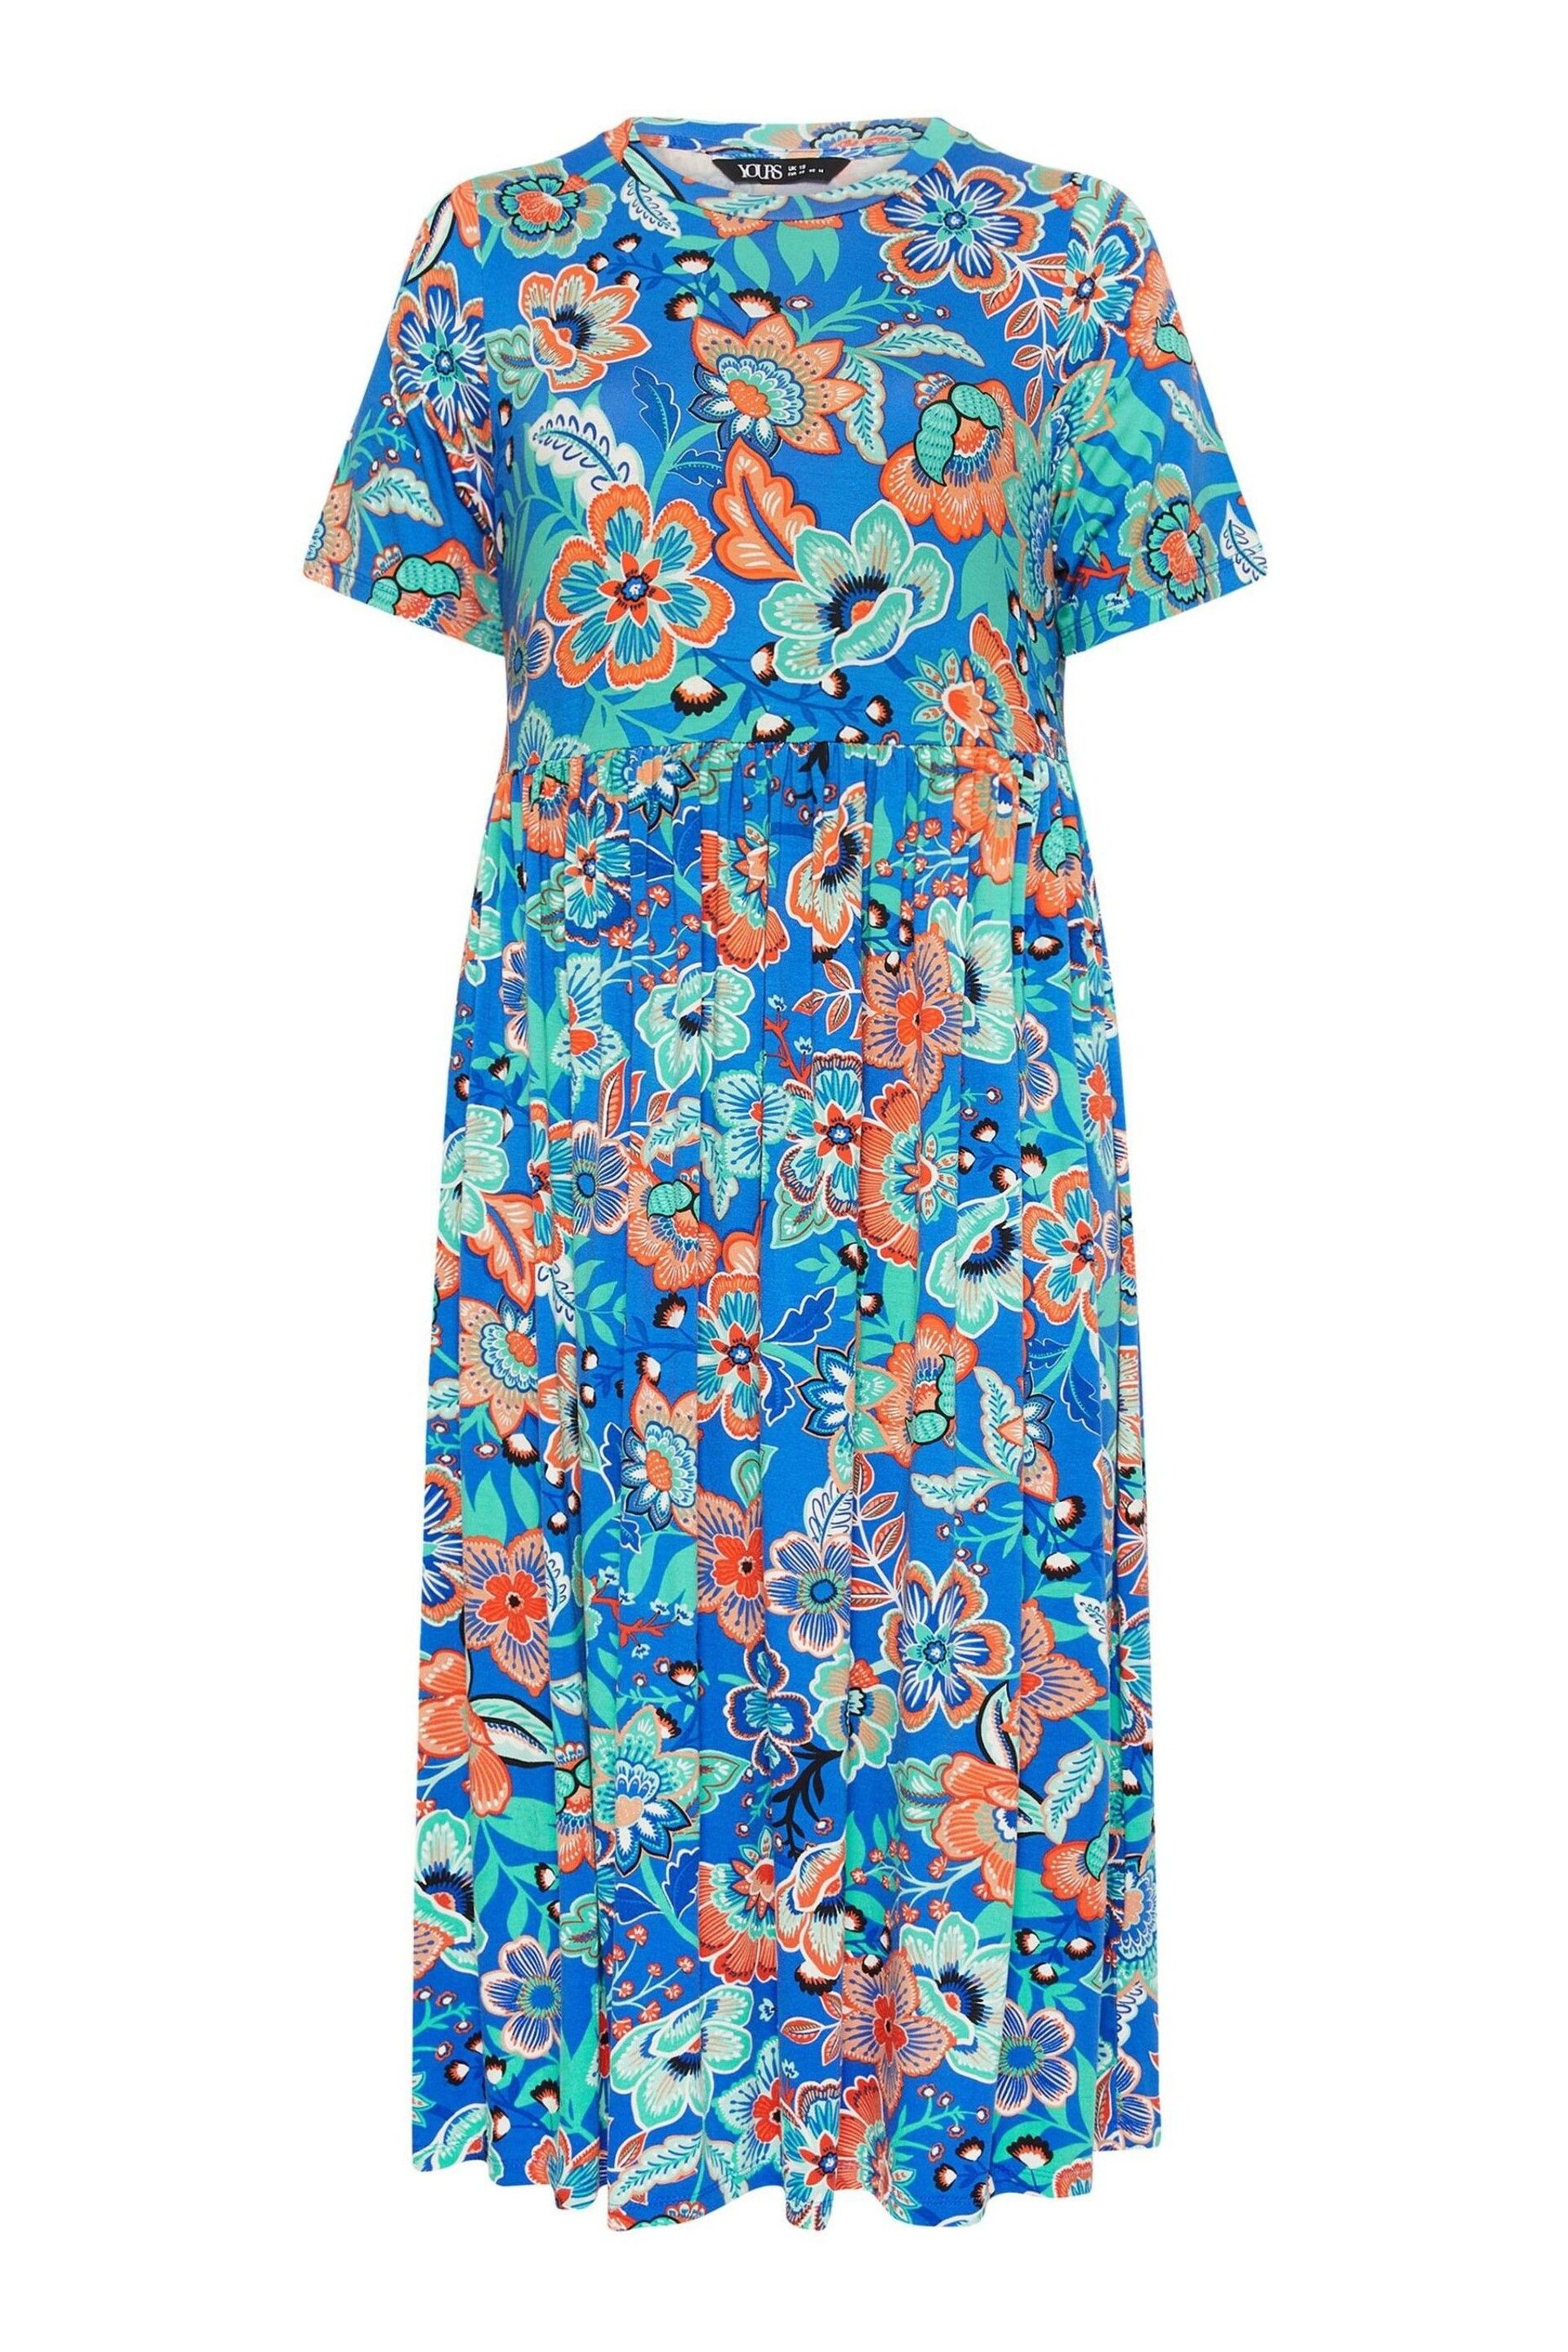 Yours Curve Blue Floral Print Midi Smock Dress - Image 5 of 5